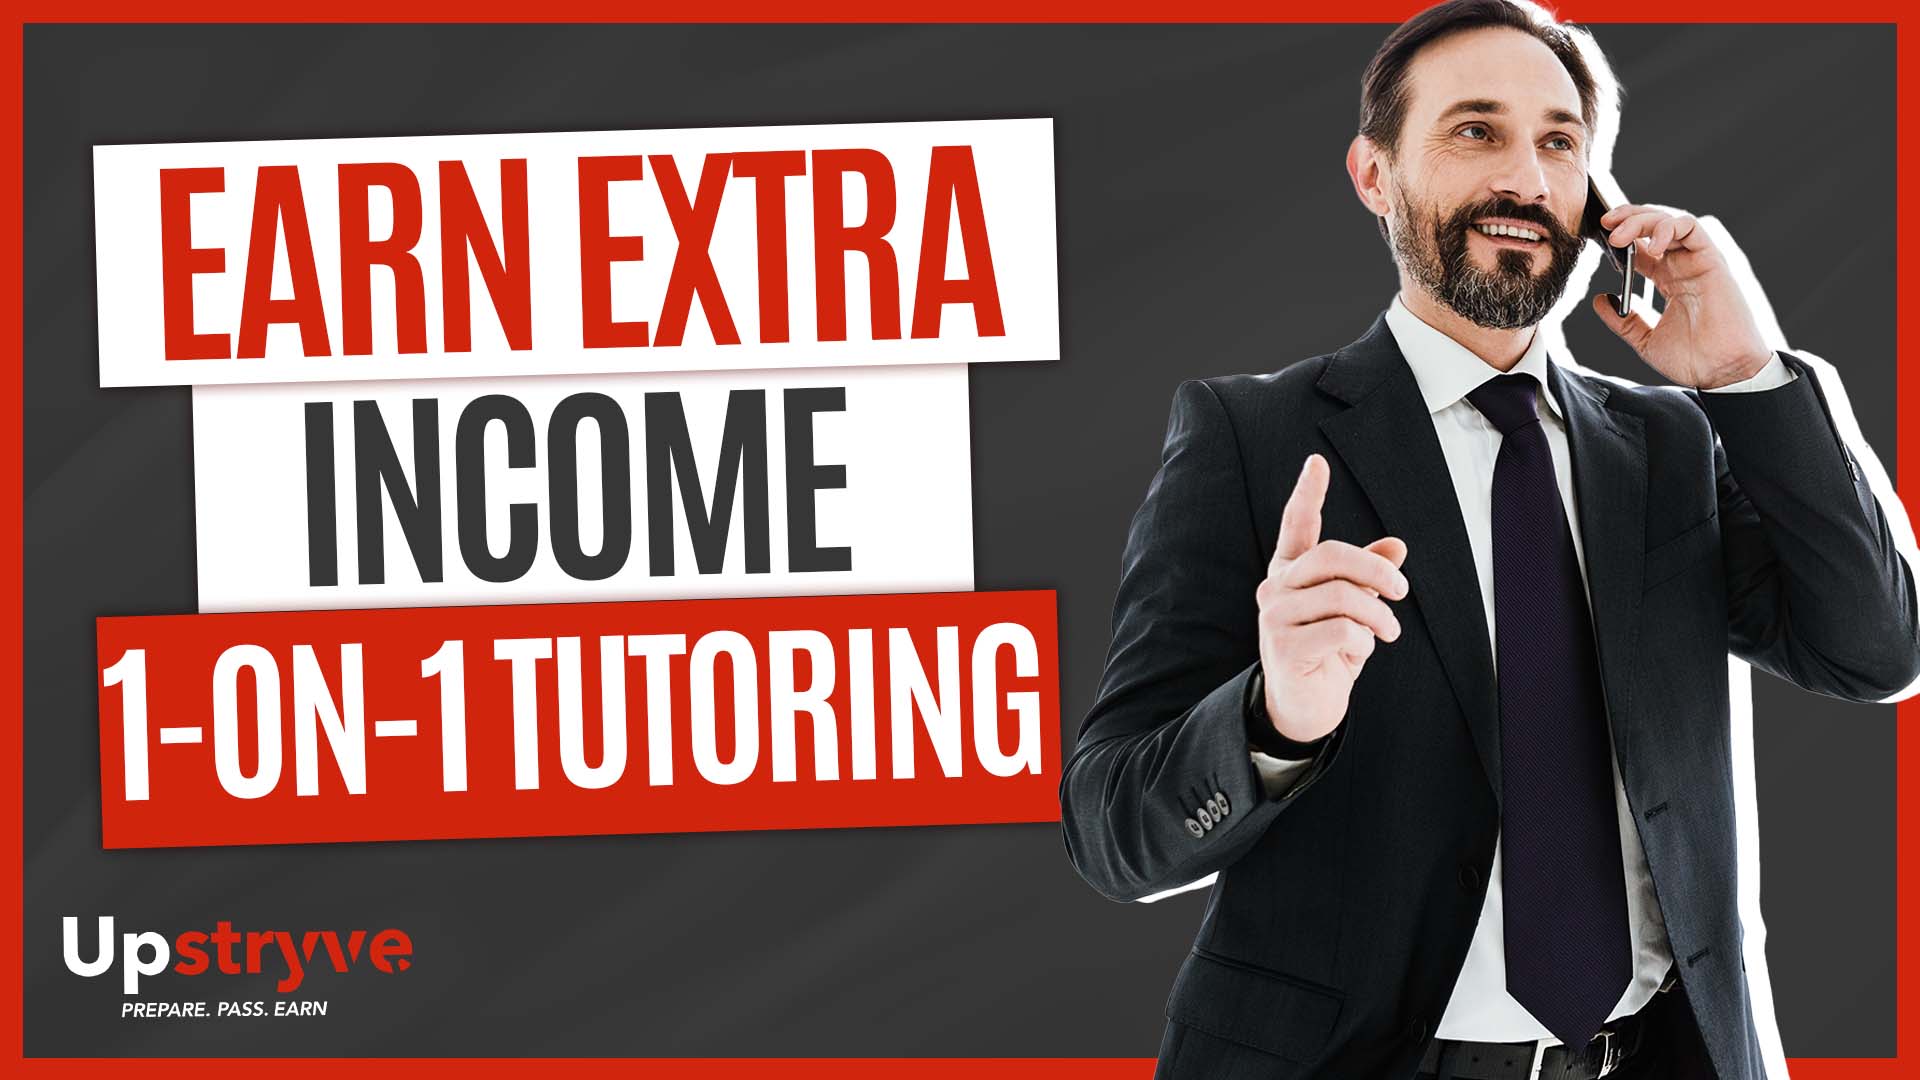 Interested in becoming a tutor? Join the team 👉 https://upstryve.com/pages/how-to-become-a-tutor

Join our team of experts! Here at Upstryve we believe tradespeople hold the key to success for future trade men and women. Use the knowledge you’ve acquired over the years and help aspiring tradesmen and tradeswomen pass their exams and get their license. Start on a new career path as a tutor and discover financial freedom. Set your hourly wage, decide which hours you would like to tutor students and work from the comfort of your own home. Earn a second stream of income on your spare time while passing on your extensive knowledge.

Here at Upstryve we give our tutors the opportunity to publish their own content in order to create a new stream of income.  Join other industry experts through the Upstryve Publishing platform. Publish sample questions, sample tests, video tutorials, study guides or simple tips and tricks that could be beneficial to your students. We make the publishing process simple and effortless by collecting your digital content, packaging it and plugging it directly into our online store and expanded distribution reaching thousands of aspiring tradespeople. This allows you to solely focus on creating the content. We do the rest! Consider us your partner in your new publishing business. You will receive royalties on all the items you create once they are sold. Since it is a digital process you only need to create it once and it can be sold time and time again in print, digital or media formats.

All students will have required material for their exam preparation and test day. Here at Upstryve we have an ecommerce store with pre-packaged required testing material, self-study books, online simulated practice exams and many other categories of vocational and higher-level education. That is why we offer our tutors the opportunity to gain a percentage of each sale created through their own unique store link. You can write your curriculum and add all the items the student will need to successfully pass their exam using Upstryve materials. Build additional easy income all while tutoring for Upstryve. We are the only online tutoring marketplace where you get paid in 3 different ways. Join our team of experts and begin to earn today with Upstryve.

Learn how to join the team: https://youtu.be/7Rjex131eH0

Website: https://upstryve.com/
Subscribe to our channel: http://bit.ly/UpStryveYouTubeChannel
Join us on Facebook: https://www.facebook.com/upstryveinc
Follow us on Instagram : https://www.instagram.com/upstryve

Upstryve connects the future tradespeople of America with industry experts for a personalized 1 on 1 tutoring experience. Get the expert guidance you need to pass your trade exam and get your license. Our instructors specialize in exam preparation for general contractor, electrical contractor, plumbing contractor, HVAC and more. Prepare, Pass and Earn with Upstryve.

#Upstryve #UpstryveExperts #MakeMoneyFromHome #MakeMoneyOnline